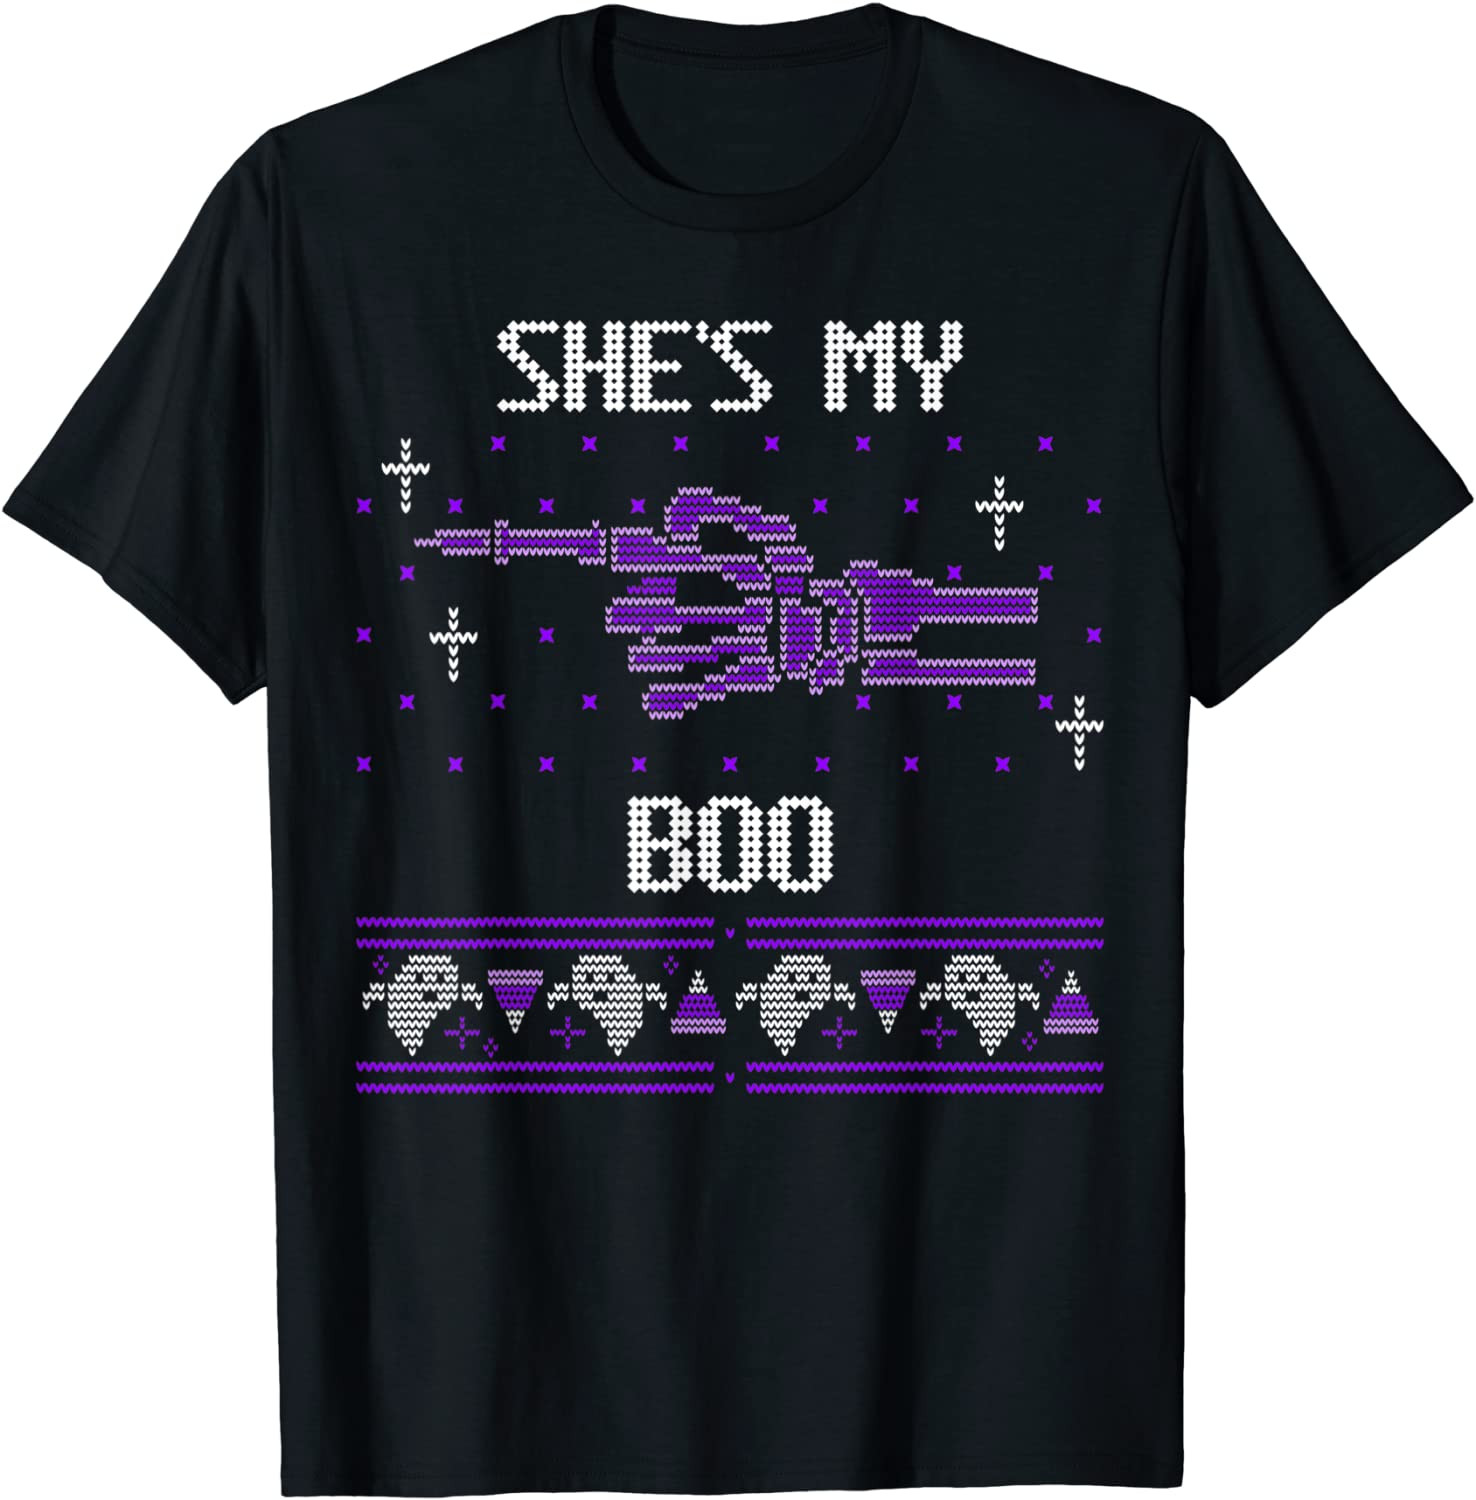 She's My Boo Easy Halloween Couples Costume T-Shirt